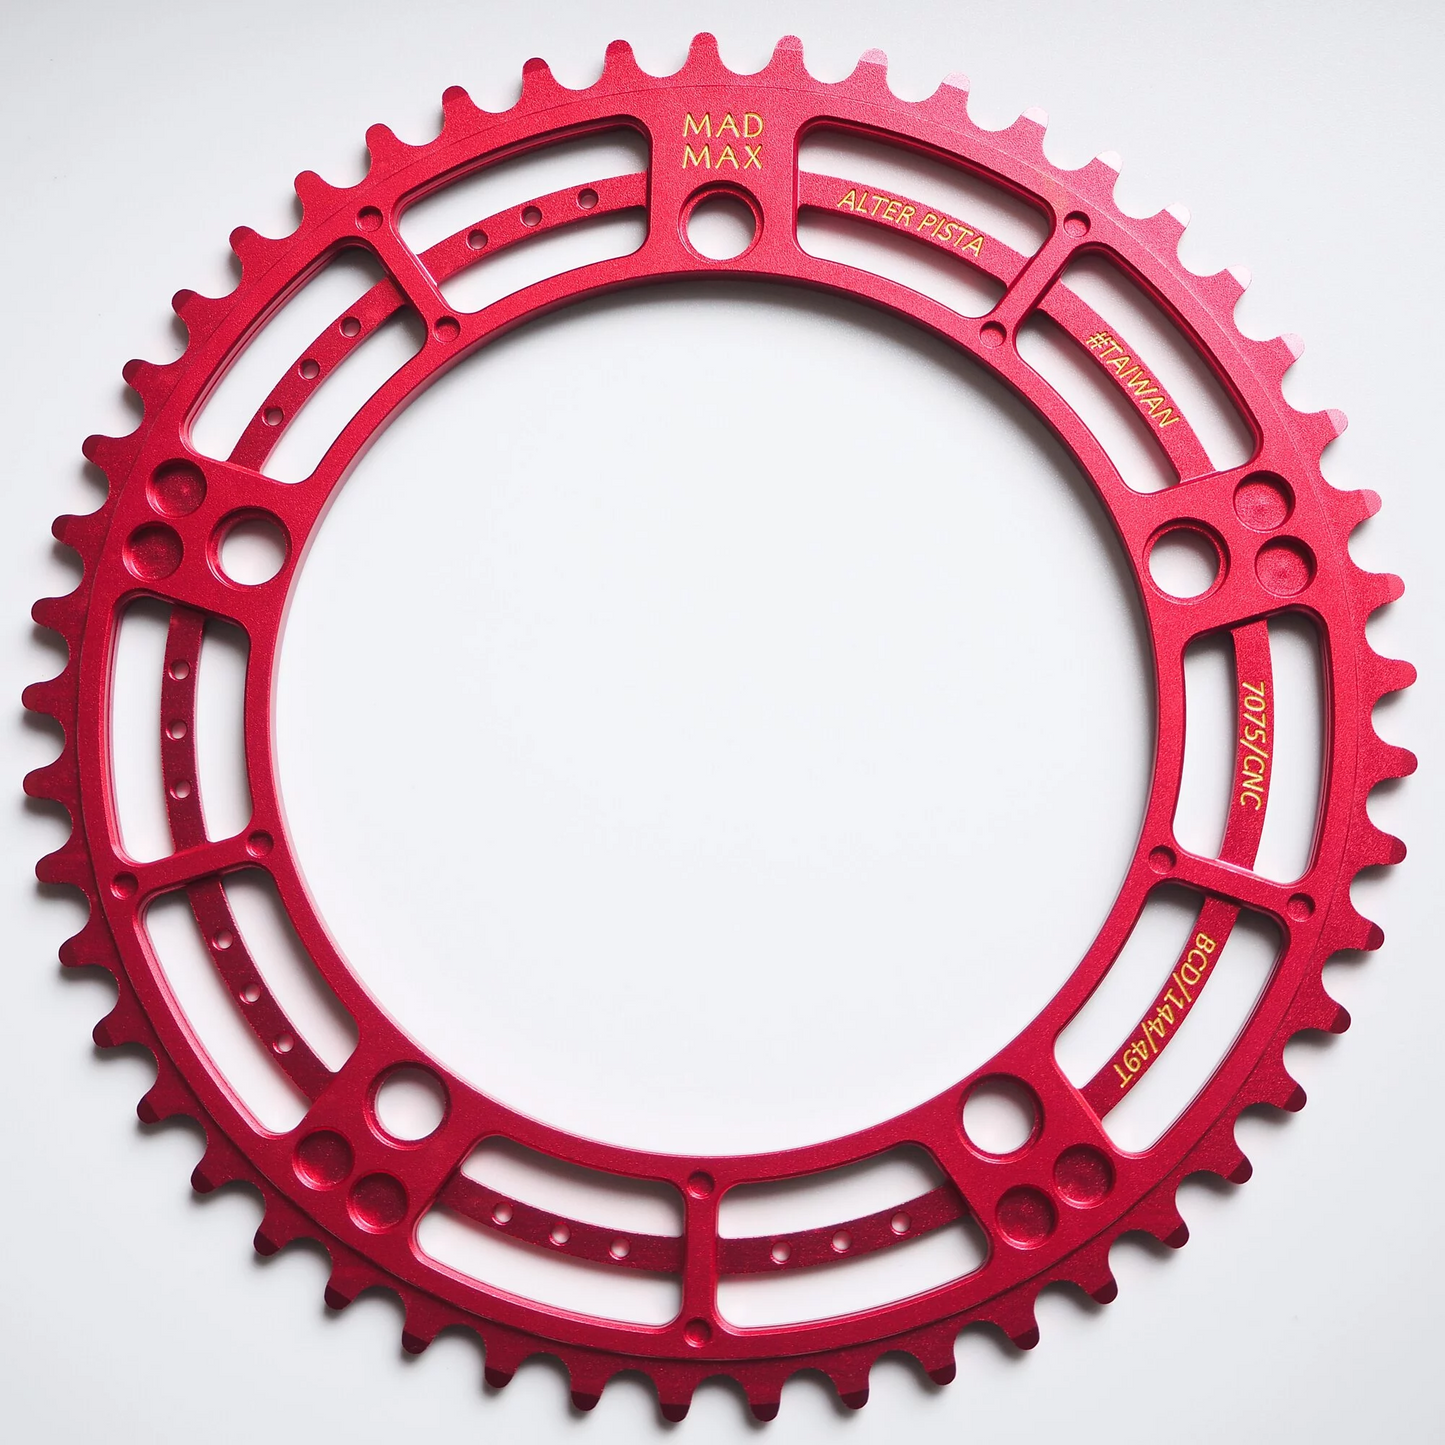 Alter Cycles Mad Max Chainring MM49R - Red 49T